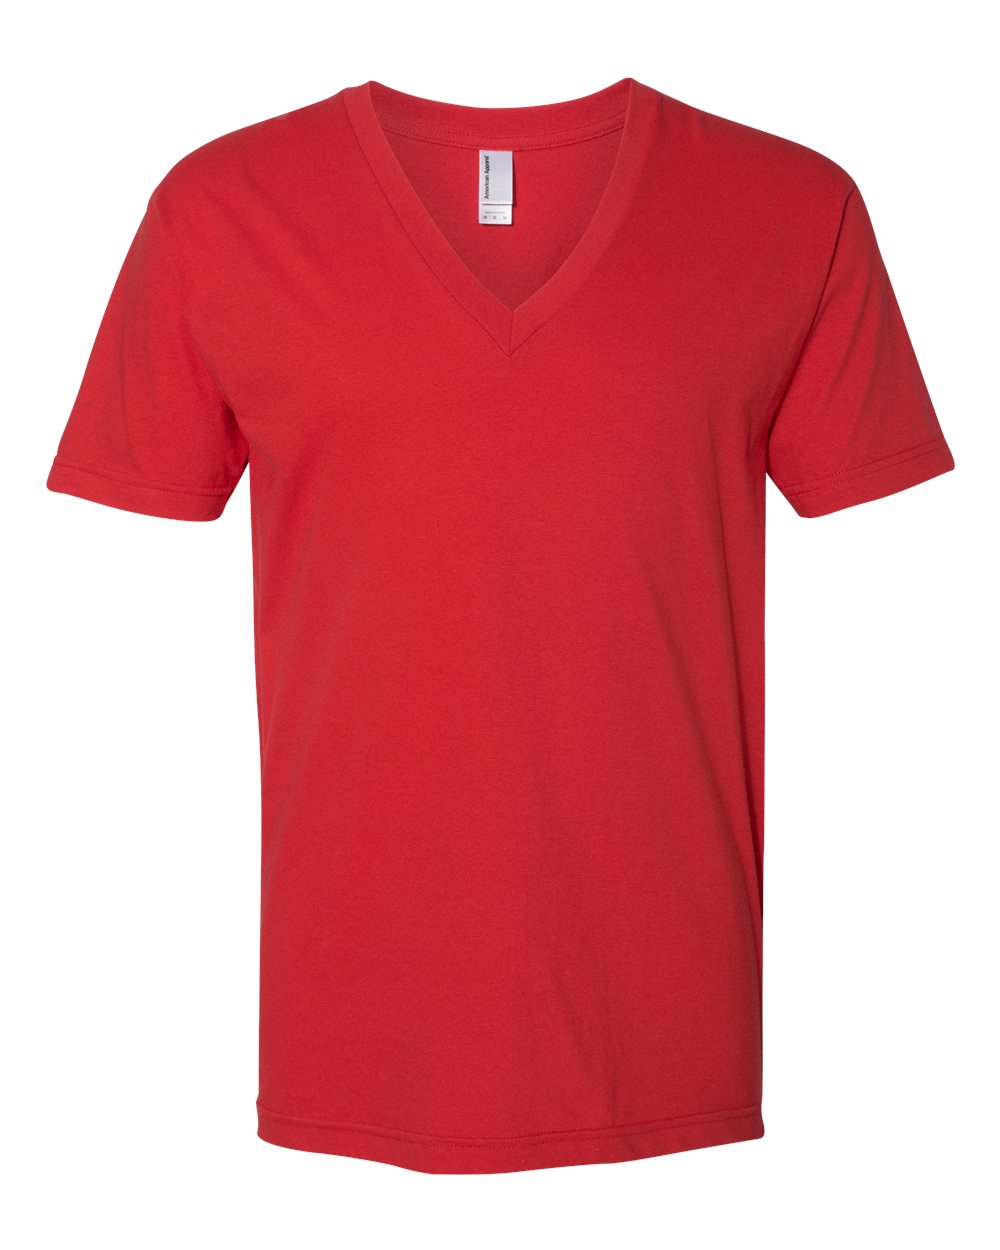 American Apparel - Fine Jersey V-Neck Tee - 2456W - Red - Small